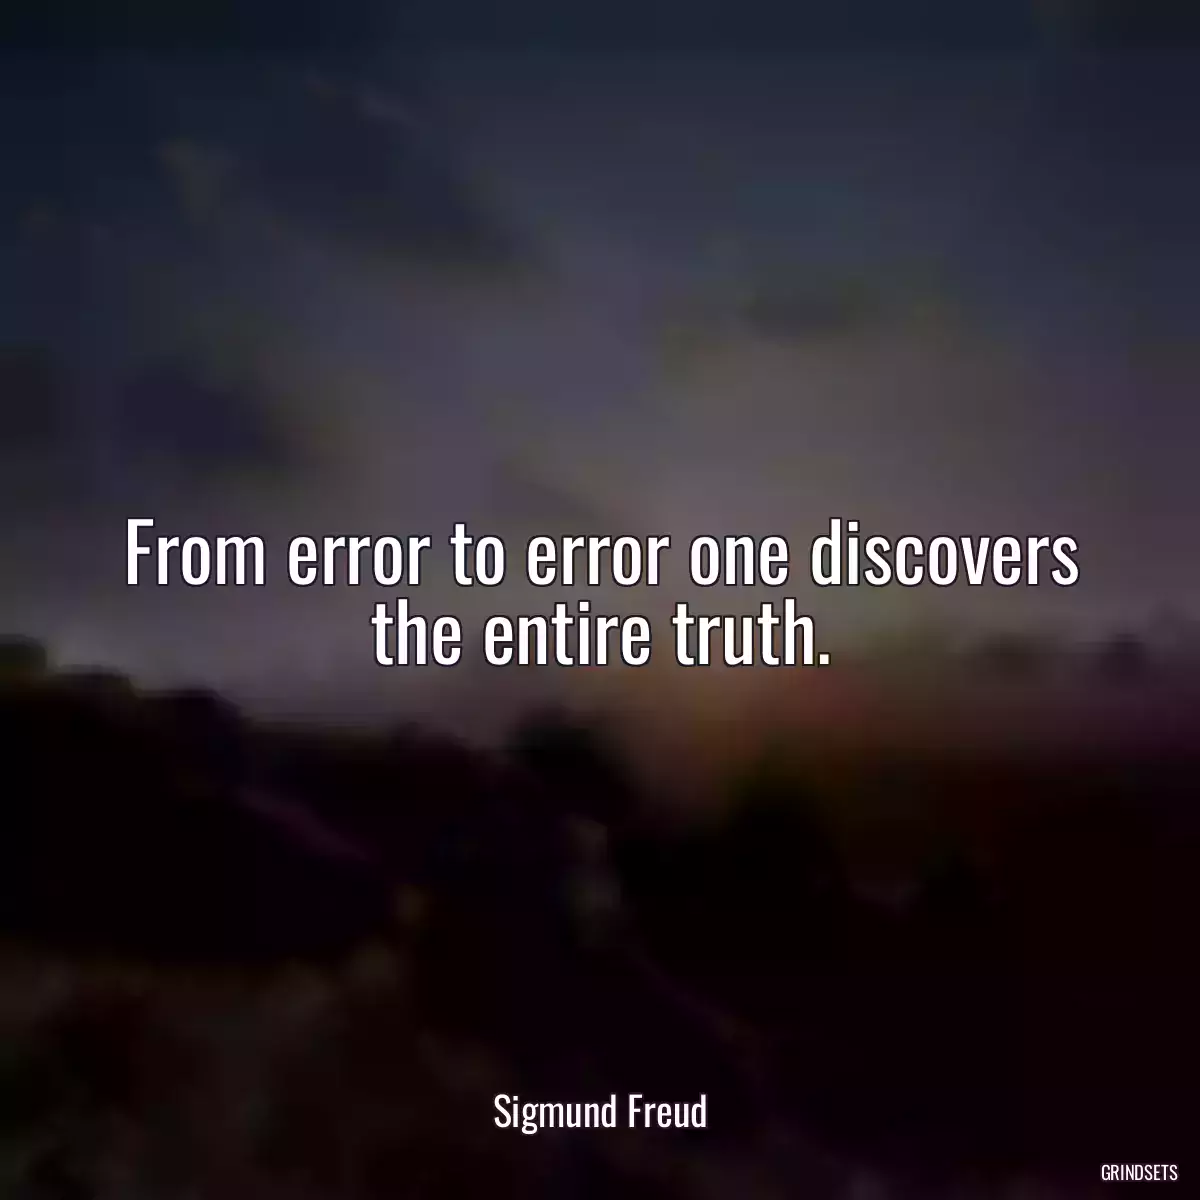 From error to error one discovers the entire truth.